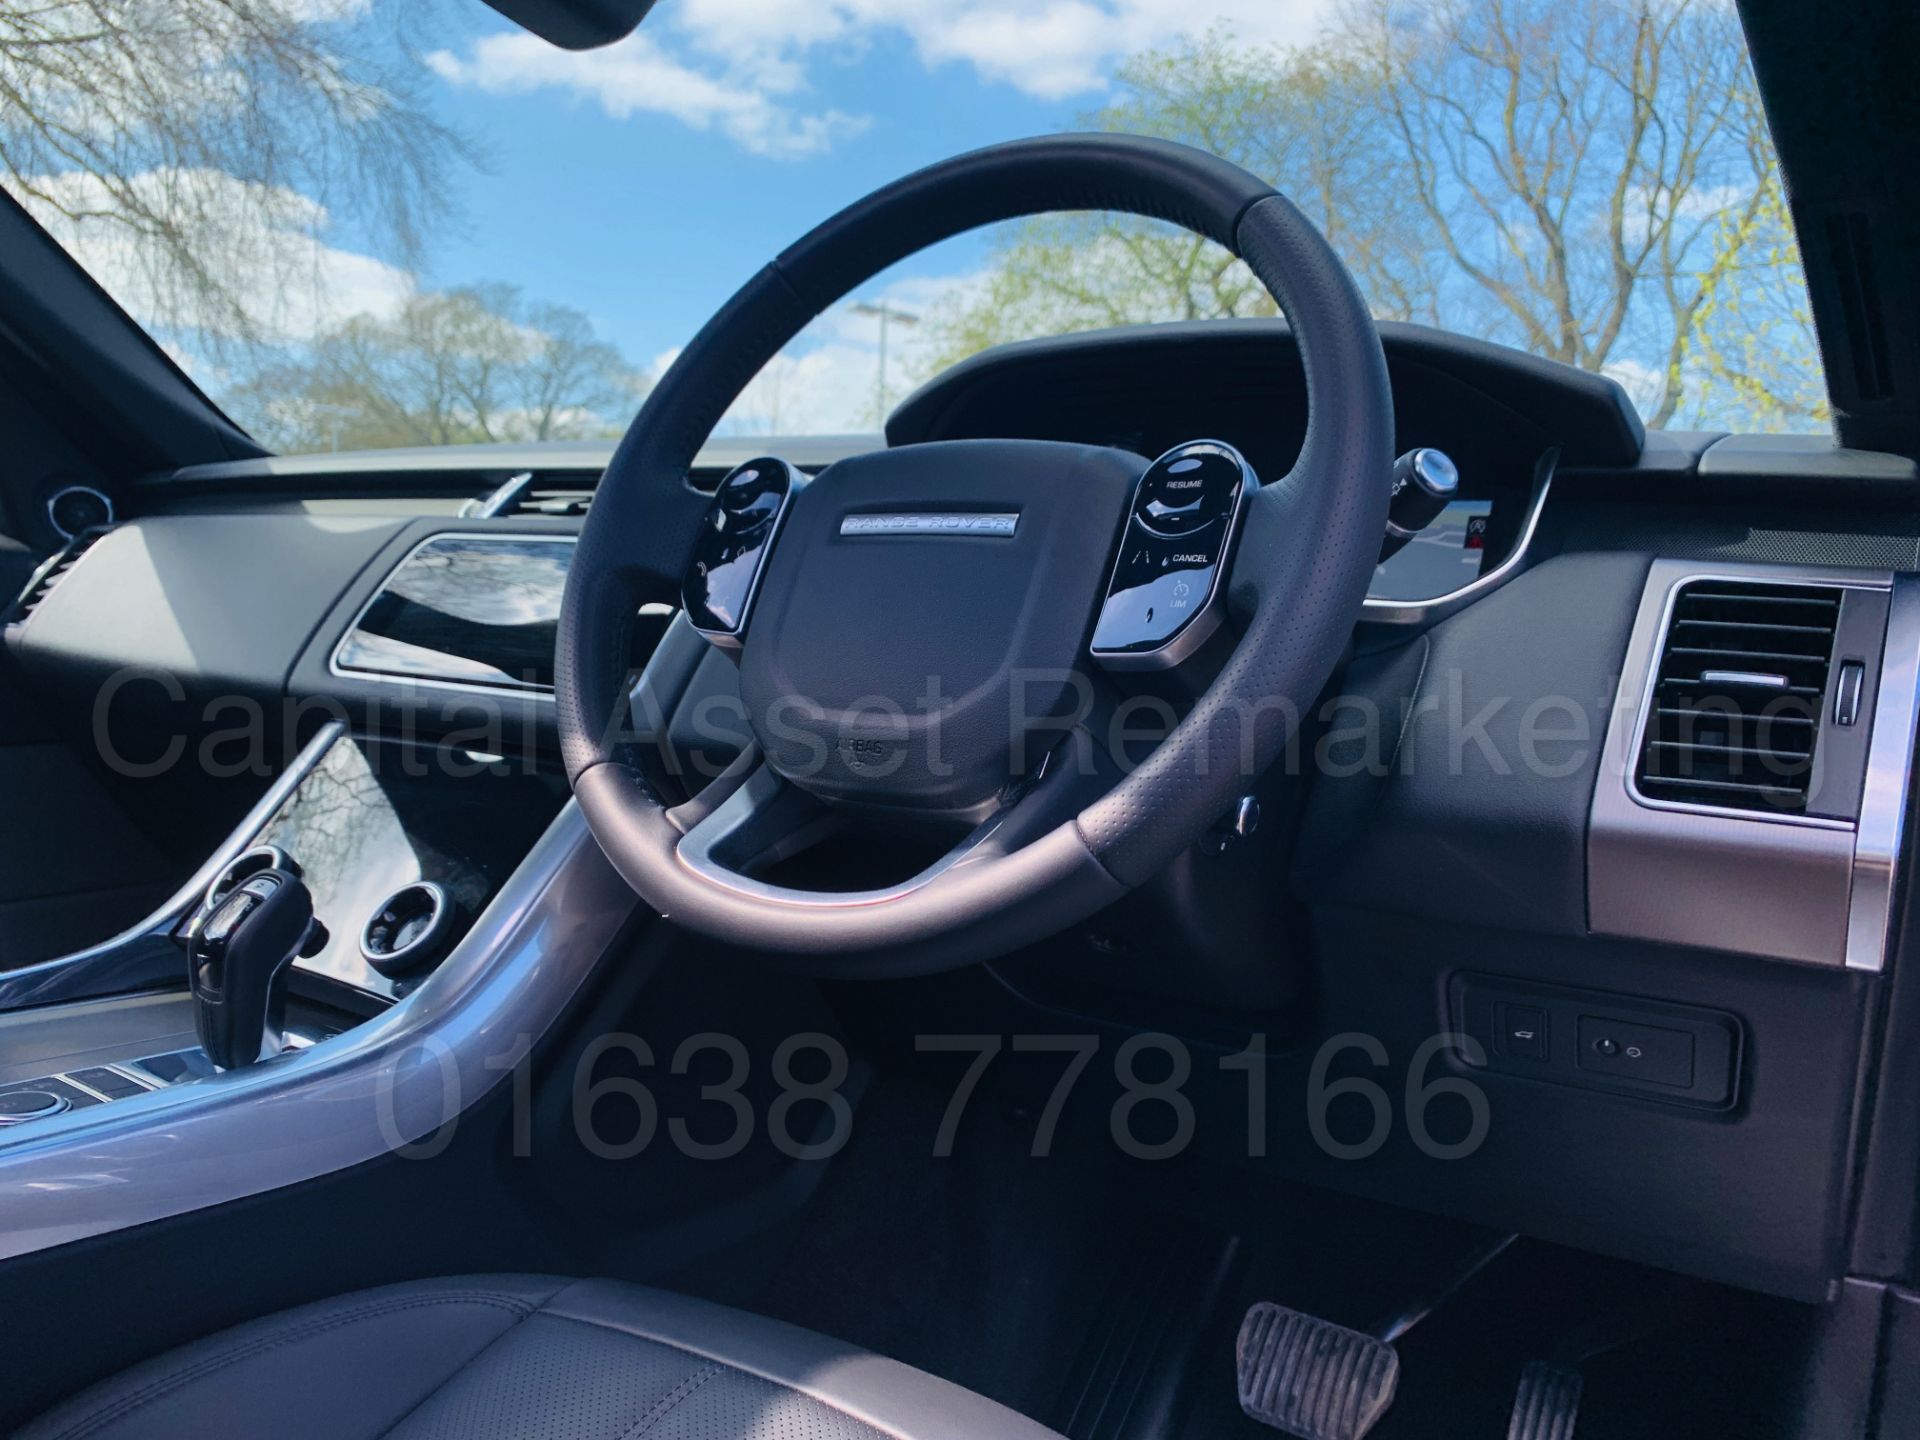 (ON SALE) RANGE ROVER SPORT *HSE* (2019 - ALL NEW MODEL) '3.0 SDV6 - 306 BHP - 8 SPEED AUTO' - Image 52 of 73